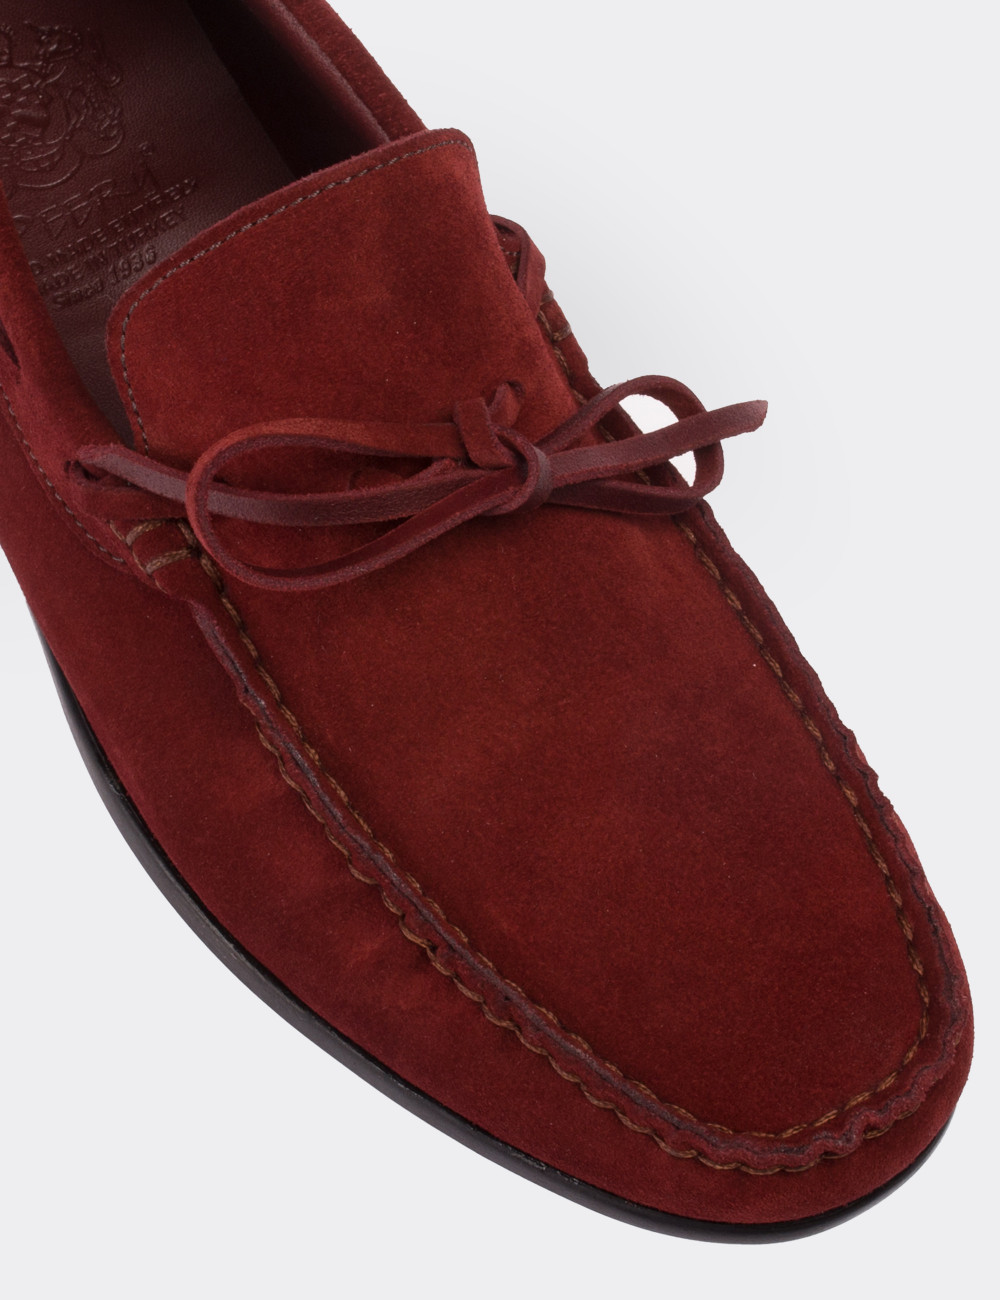 Burgundy Suede Leather Drivers - 01647MBRDC01